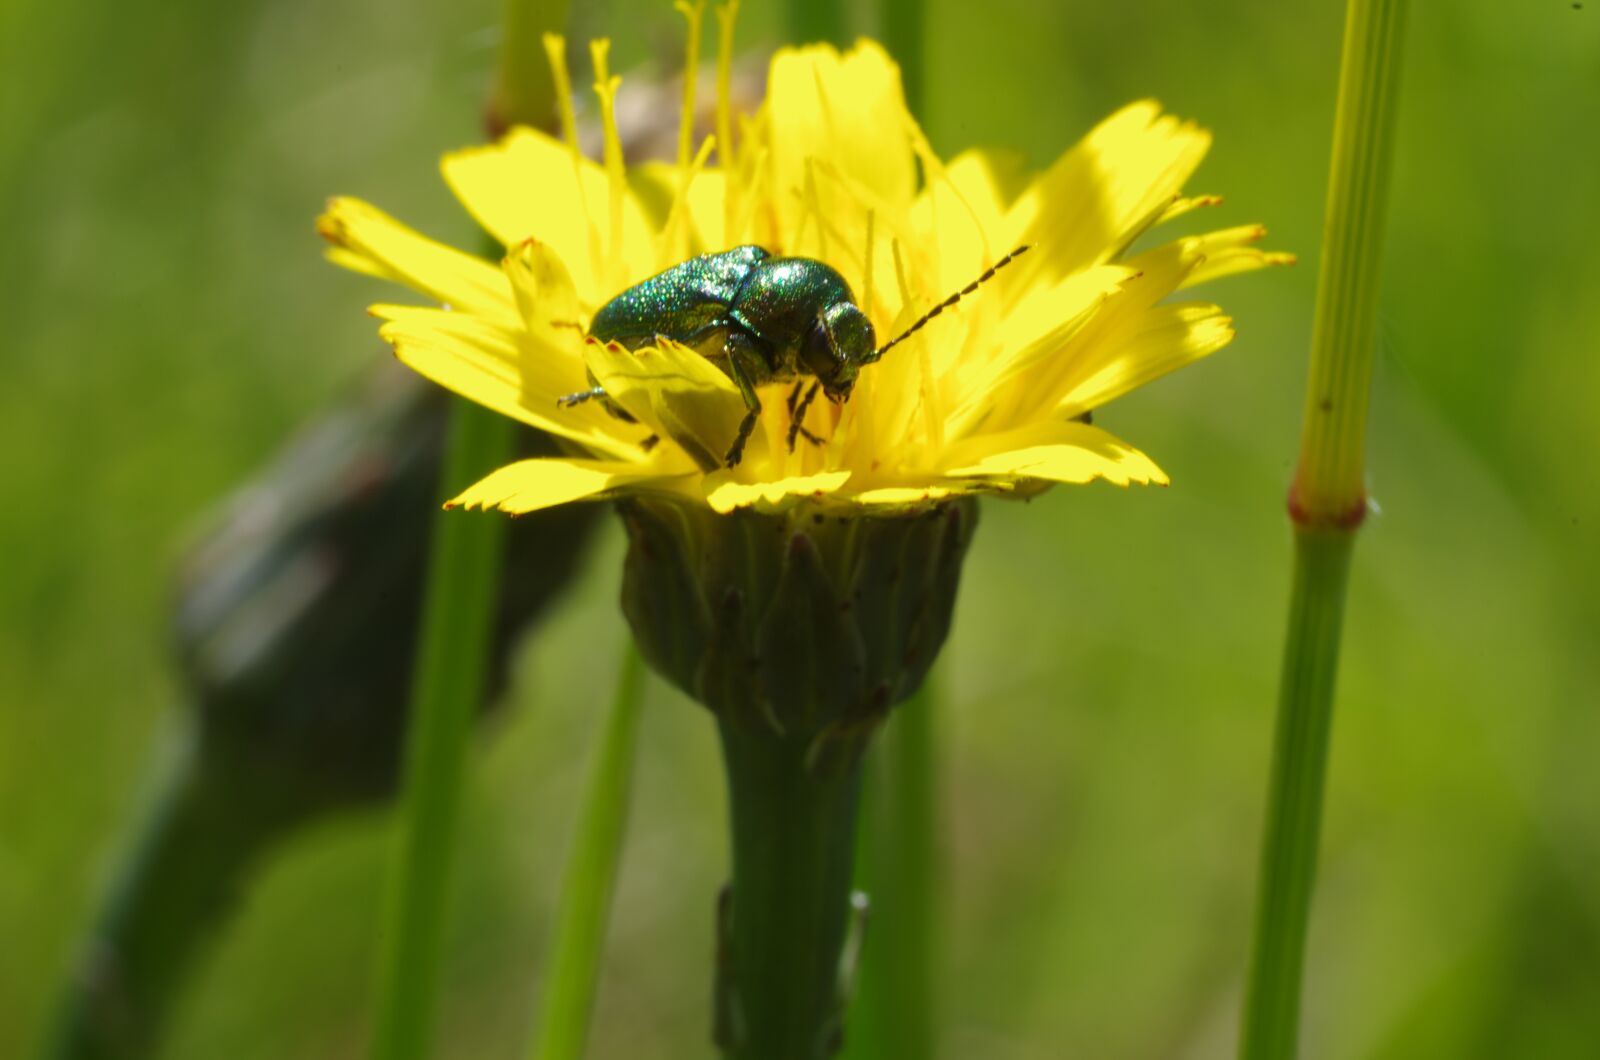 Pentax K-5 sample photo. Beetle, green, insect photography